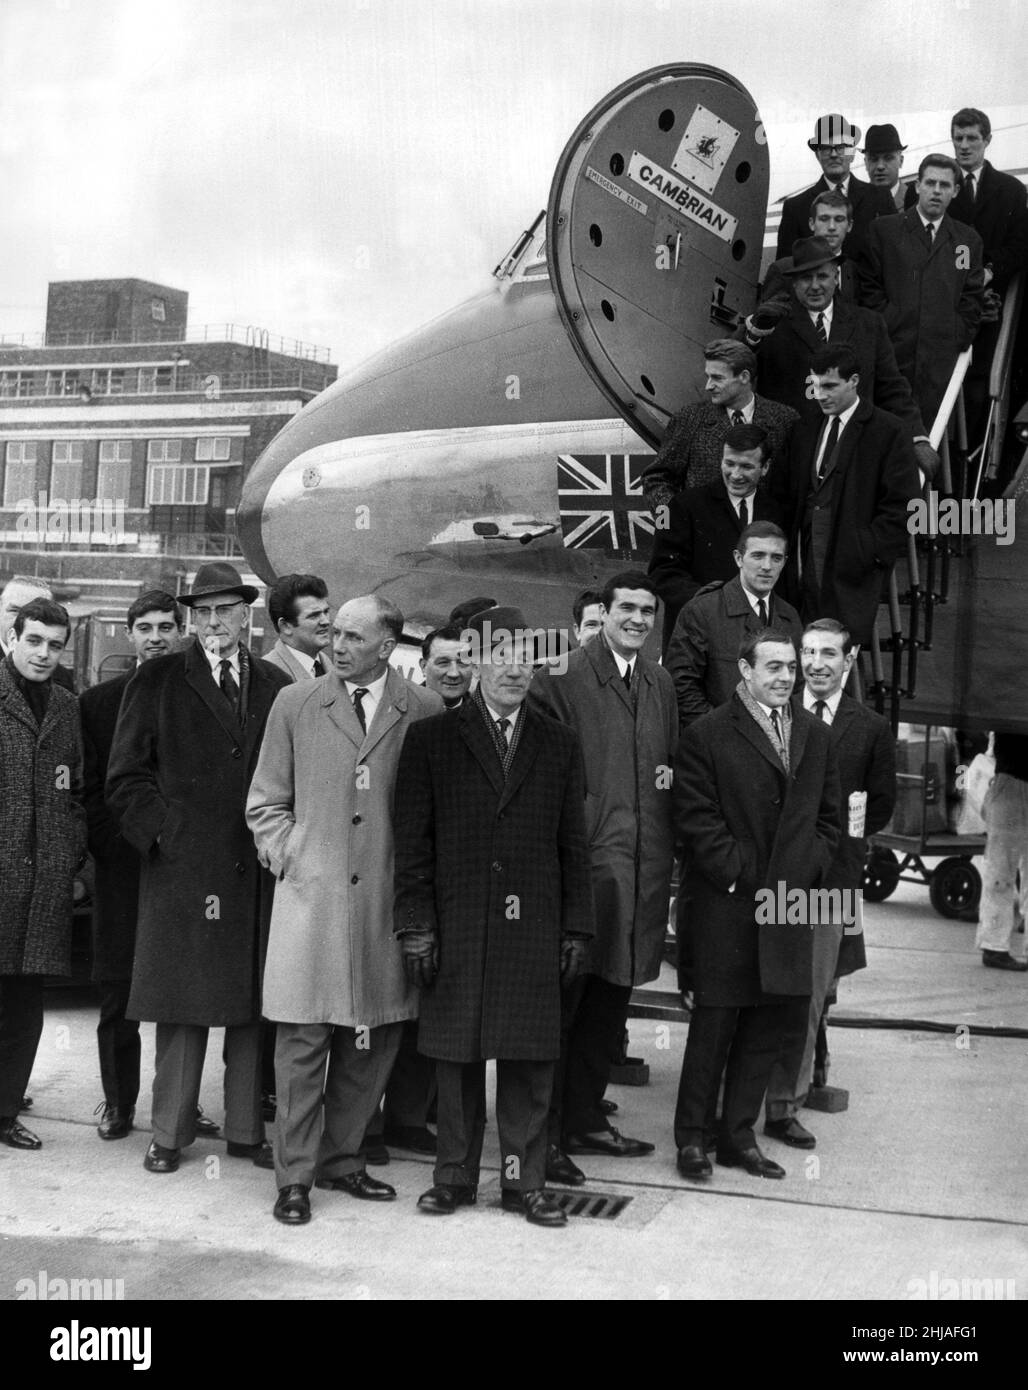 Liverpool players & directors board plan at Speke Airport London, on route to Belgium where they will face Anderlecht in the 2nd leg of their tie (16th Dec) December 1964. Liverpool won the 1st left 3-0. Final score 4-0 (agg)     Pictured Bill Shankly Ian St John Stock Photo